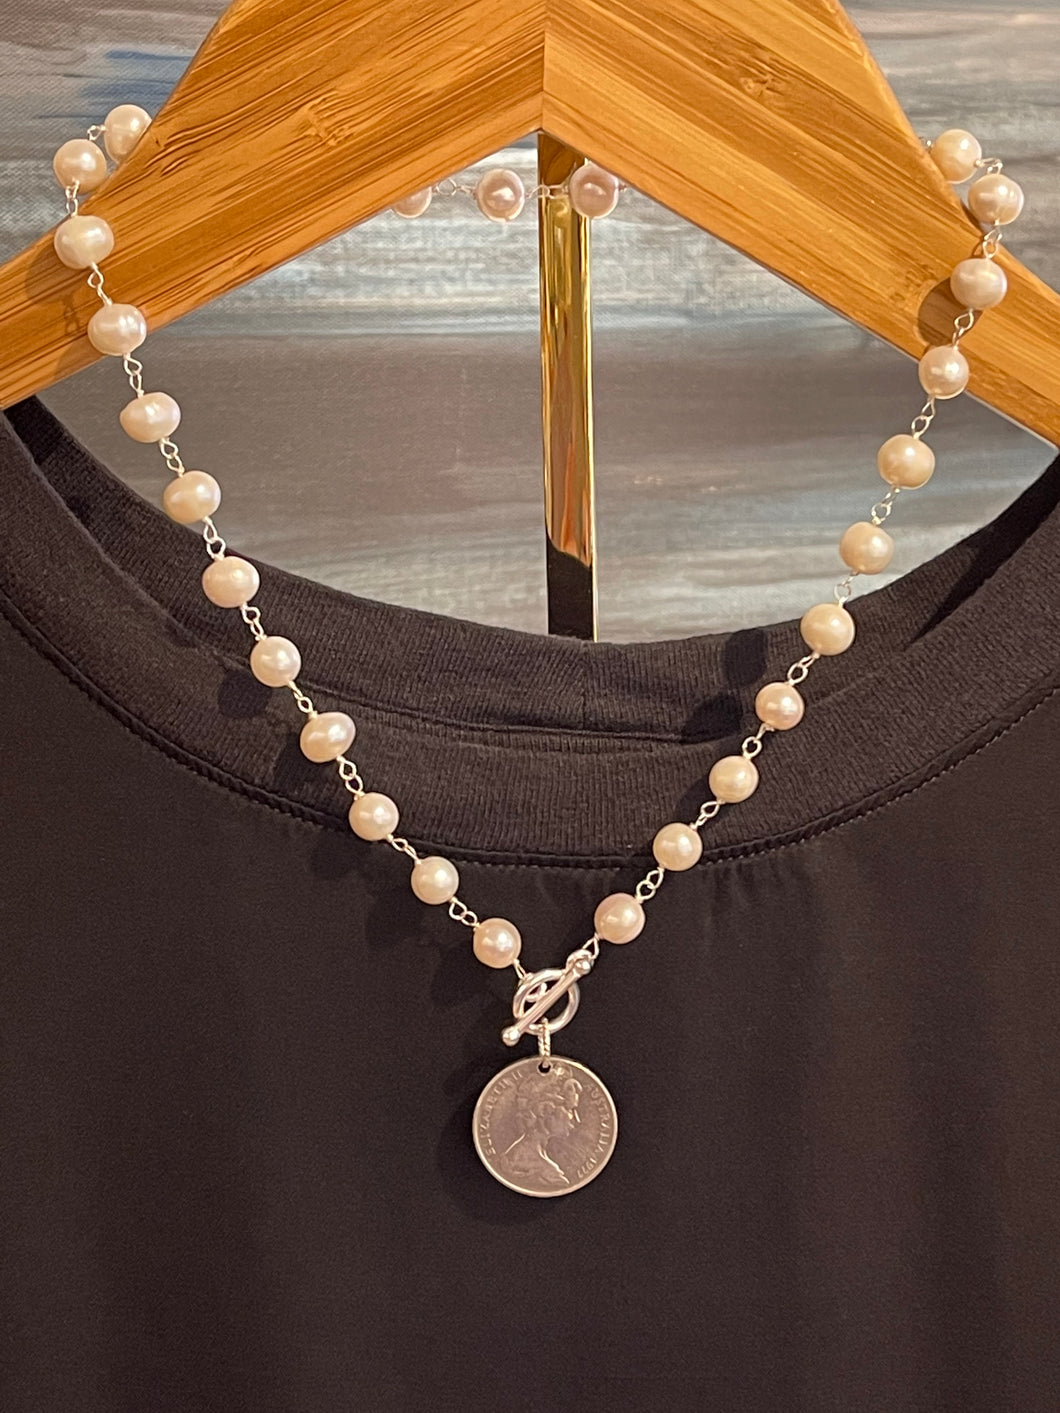 Missy Broeker Freshwater Pearl Necklace with Australian Coin